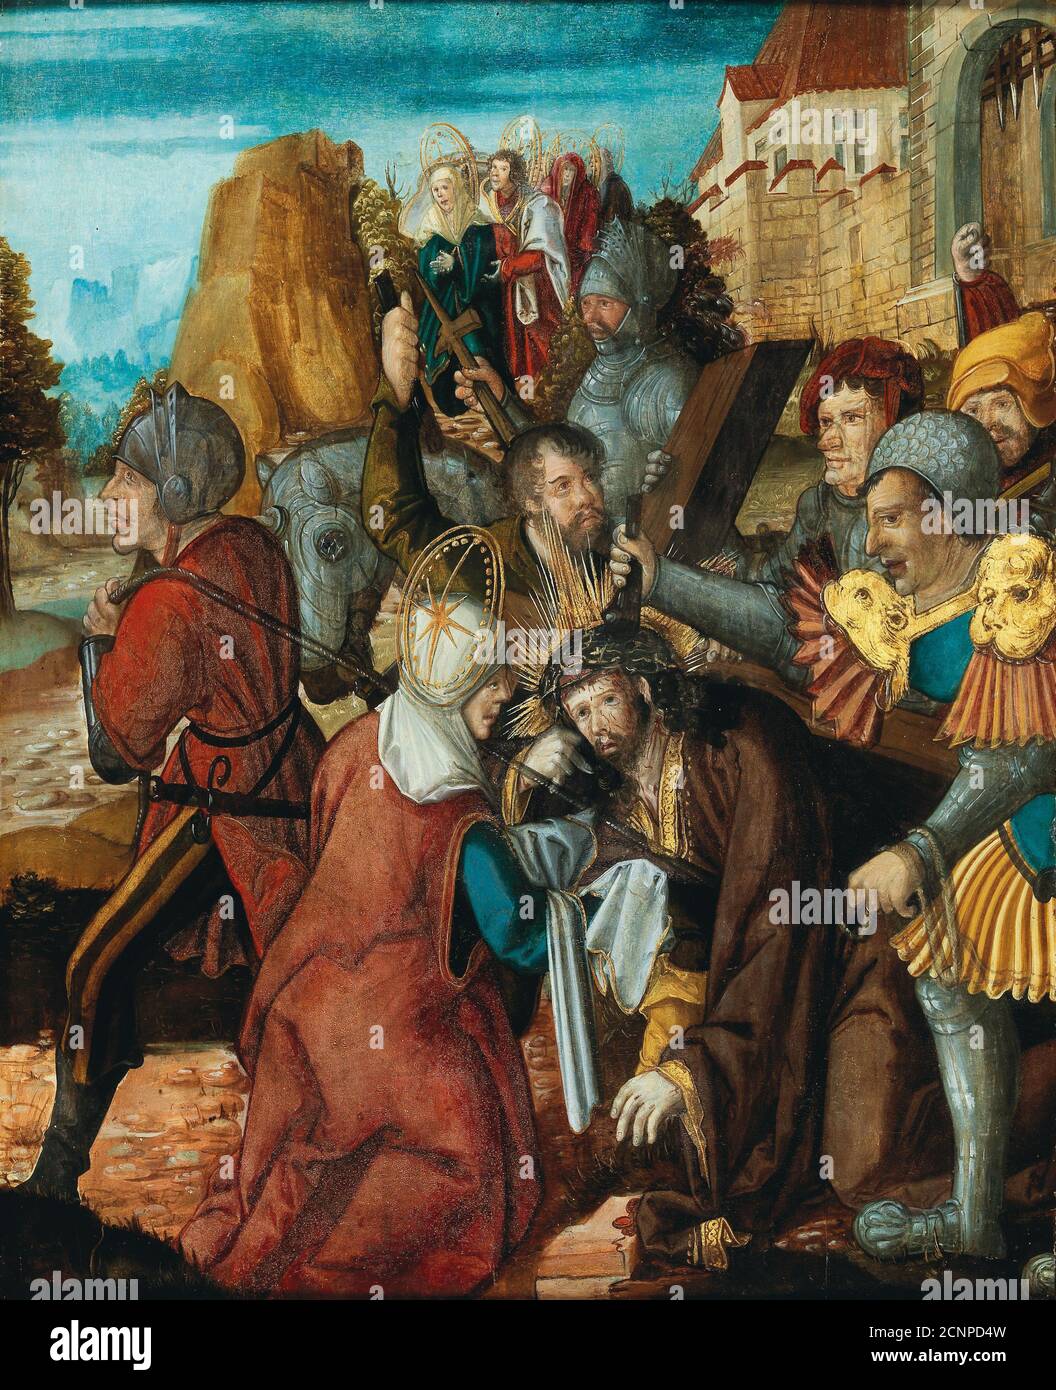 Saint Veronica presenting her veil to Christ on his way to Calvary, ca 1515-1520. Private Collection. Stock Photo